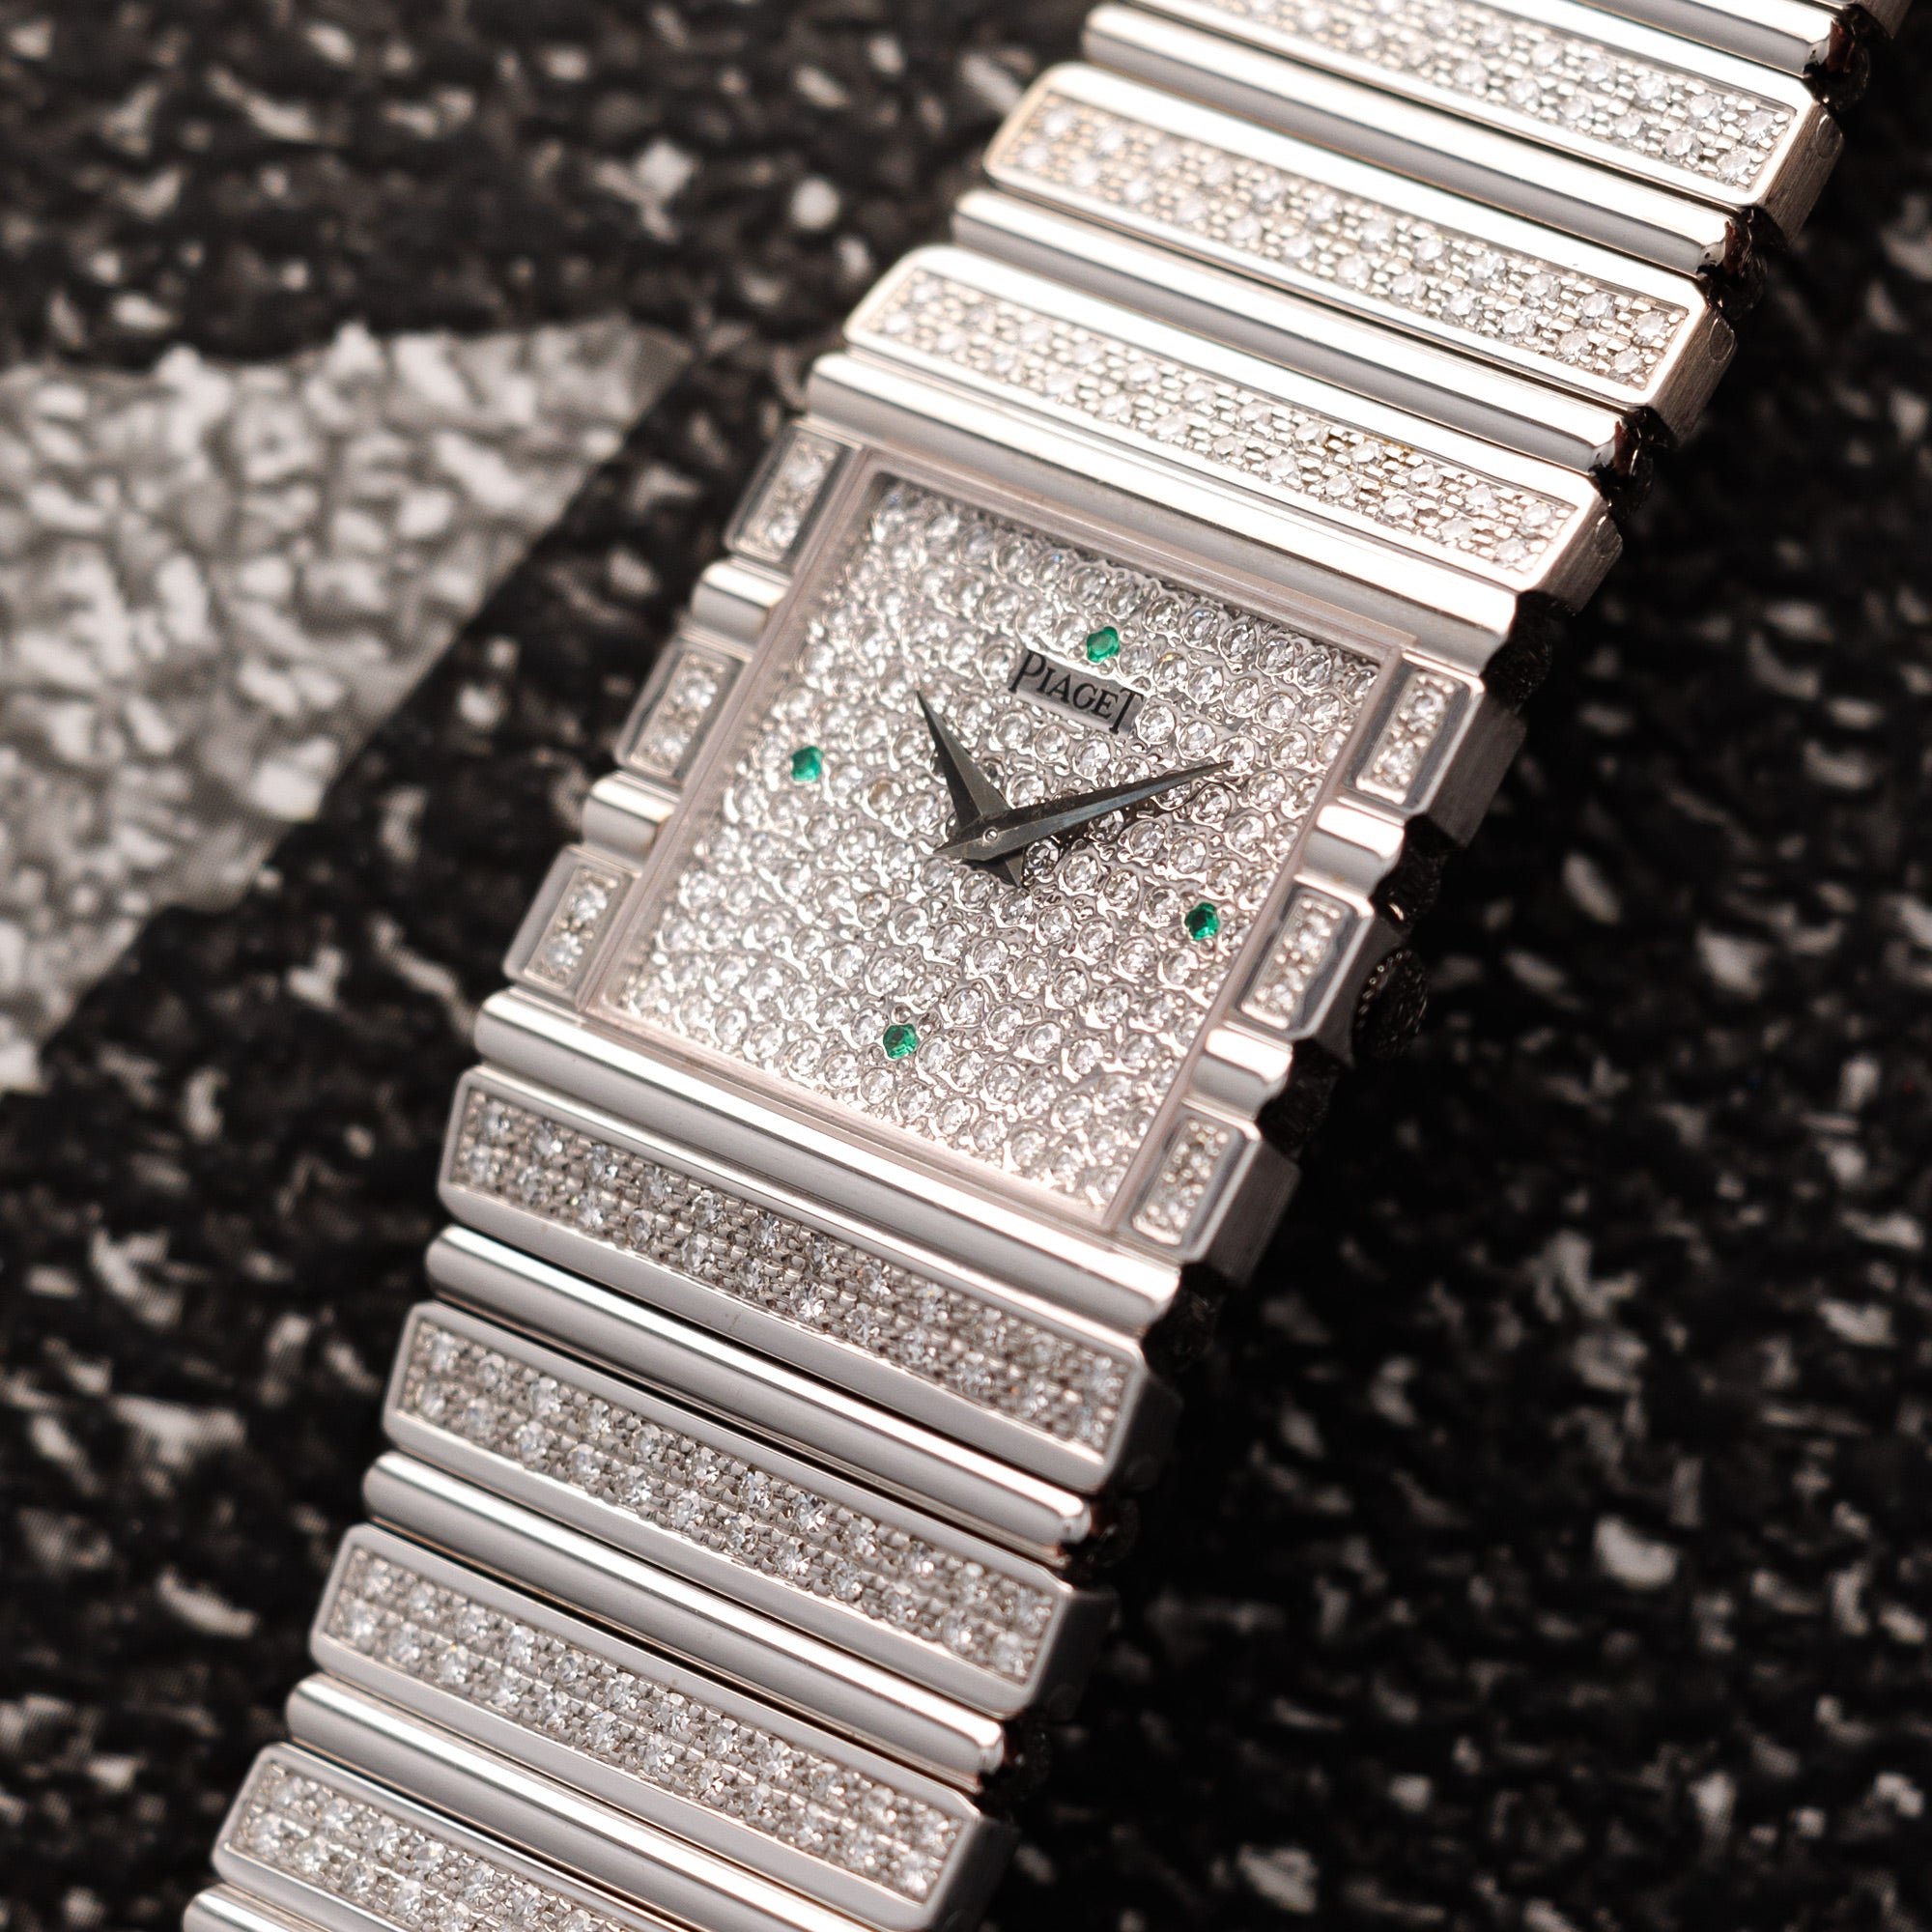 Piaget - Piaget White Gold Polo with Original Diamonds and Emeralds - The Keystone Watches